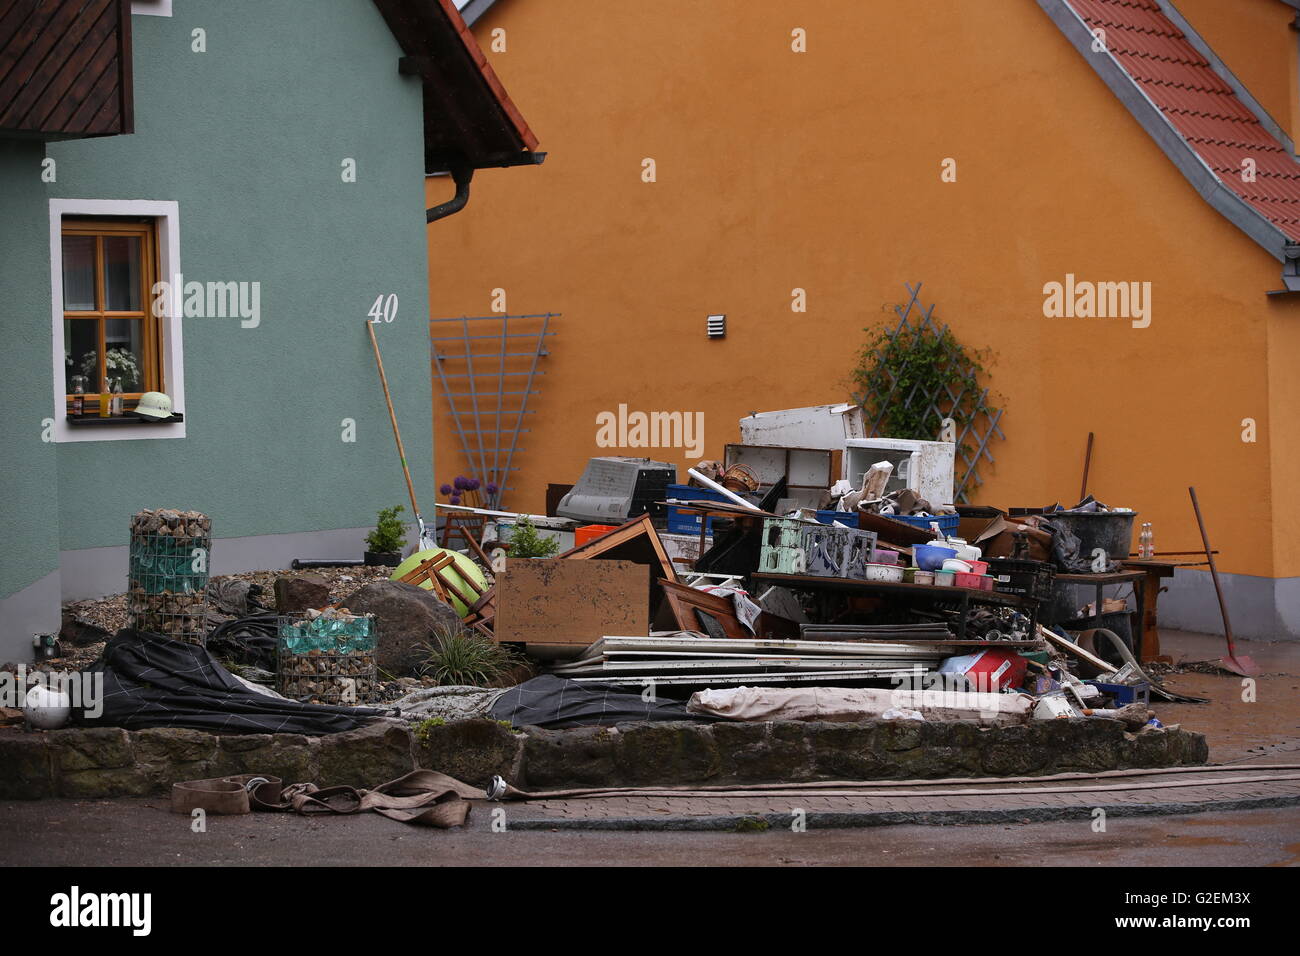 Sondernohe, Germany. 30th May, 2016. Furniture, fitments, and refuse, lie in a driveway after severe weather in Sondernohe, Germany, 30 May 2016. Overnight numerous streets and basements flooded and landslides blocked roads. Photo: DANIEL KARMANN/dpa/Alamy Live News Stock Photo